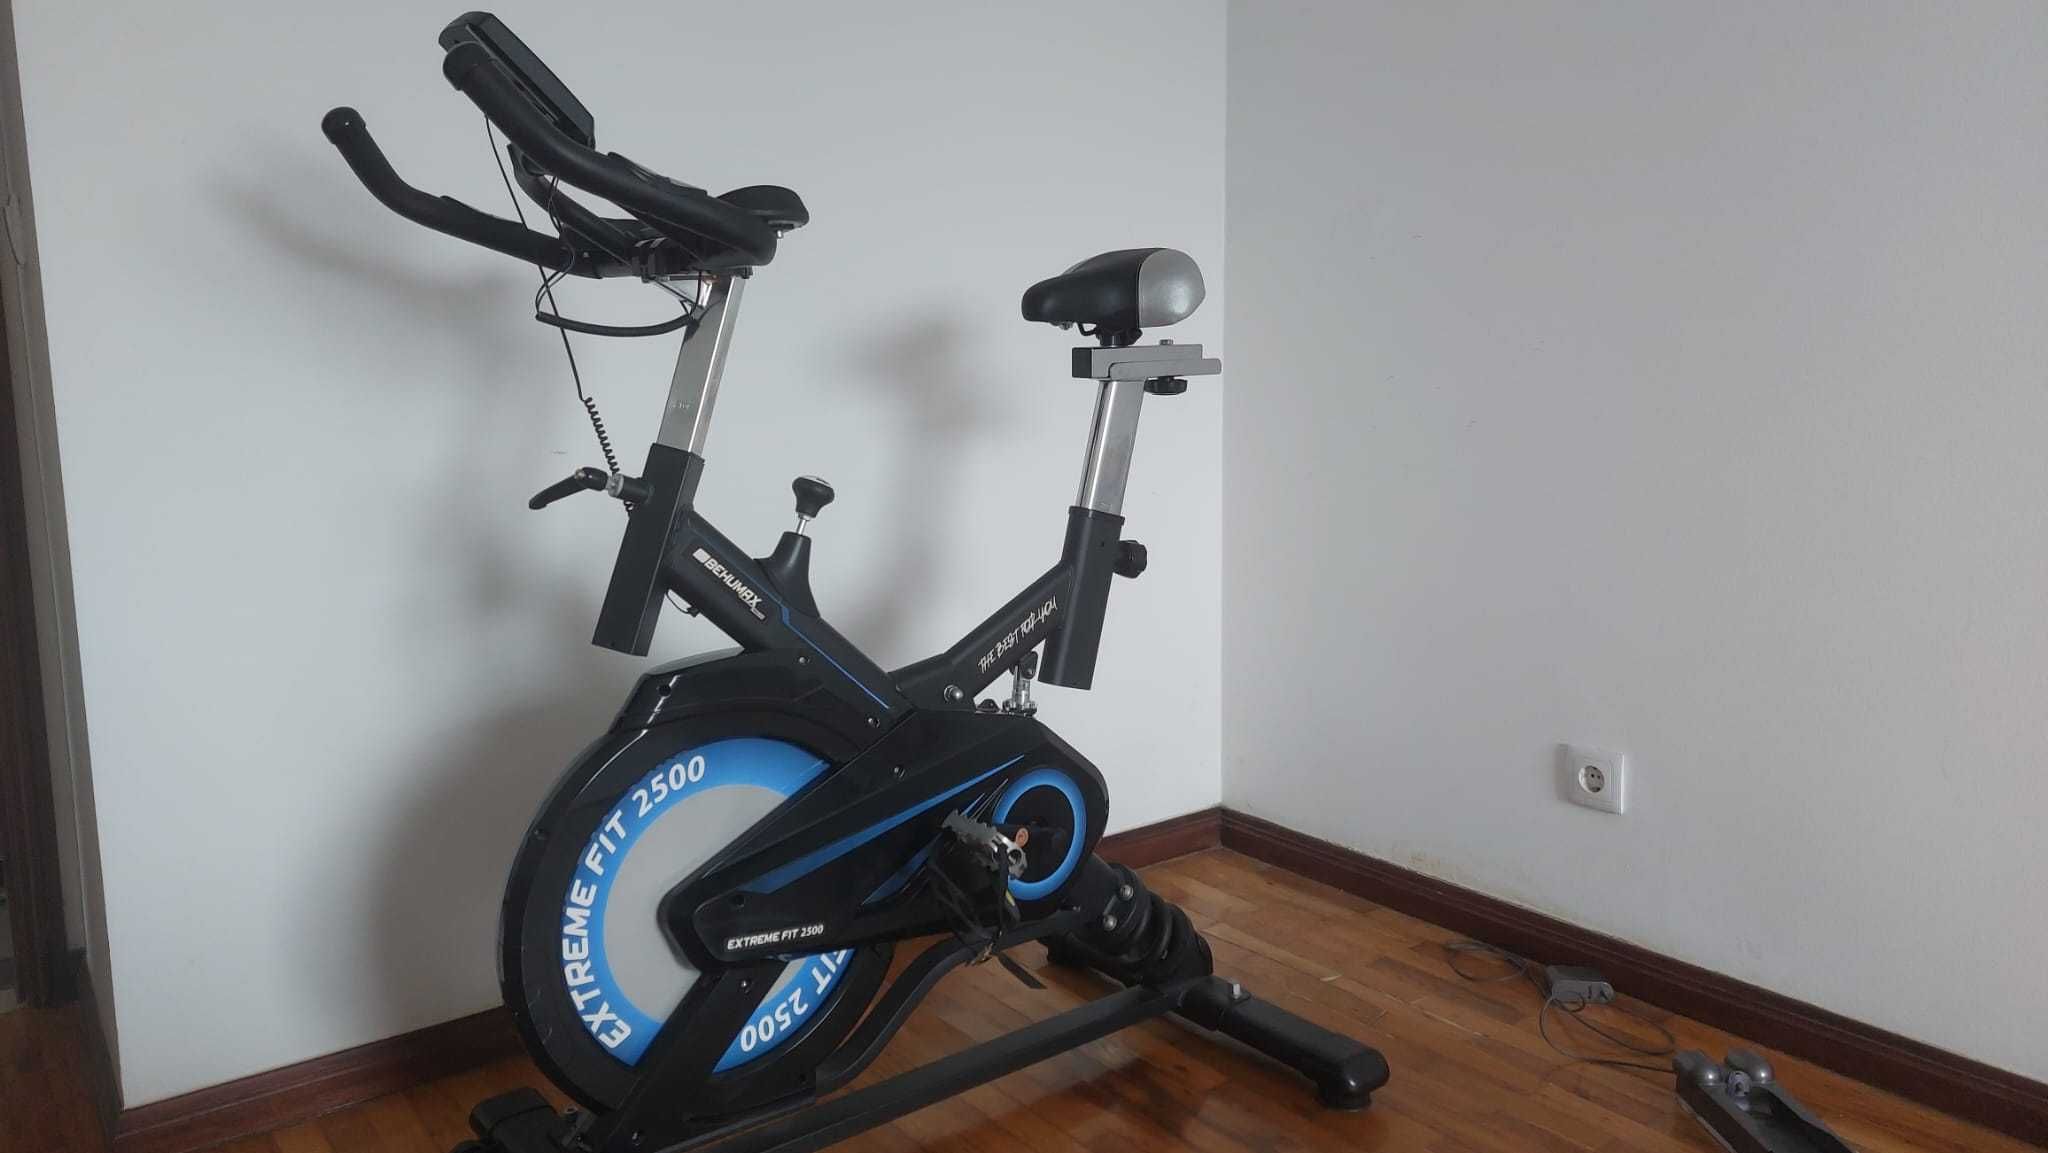 Bicicleta de Spinning Extreme Fit 2500